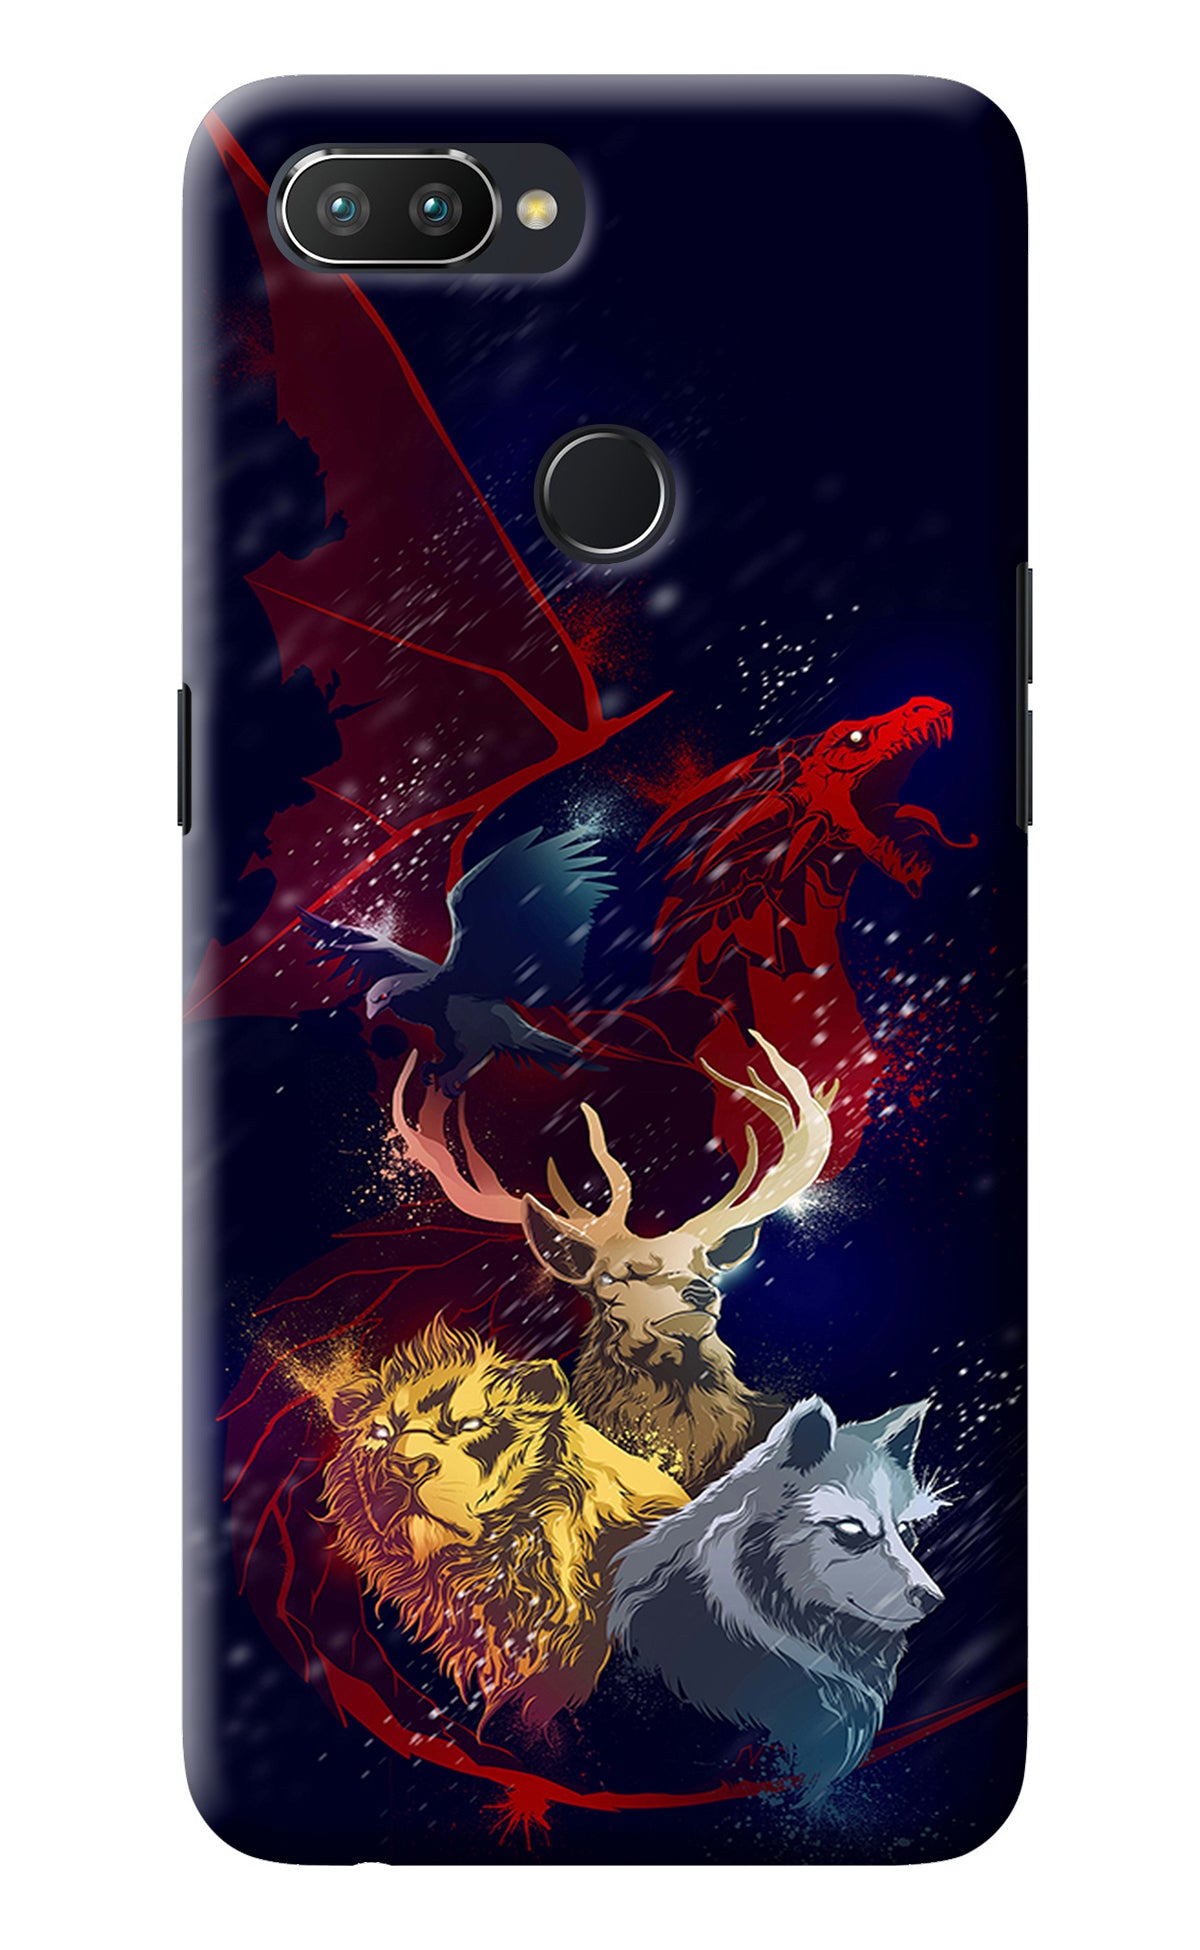 Game Of Thrones Realme 2 Pro Back Cover